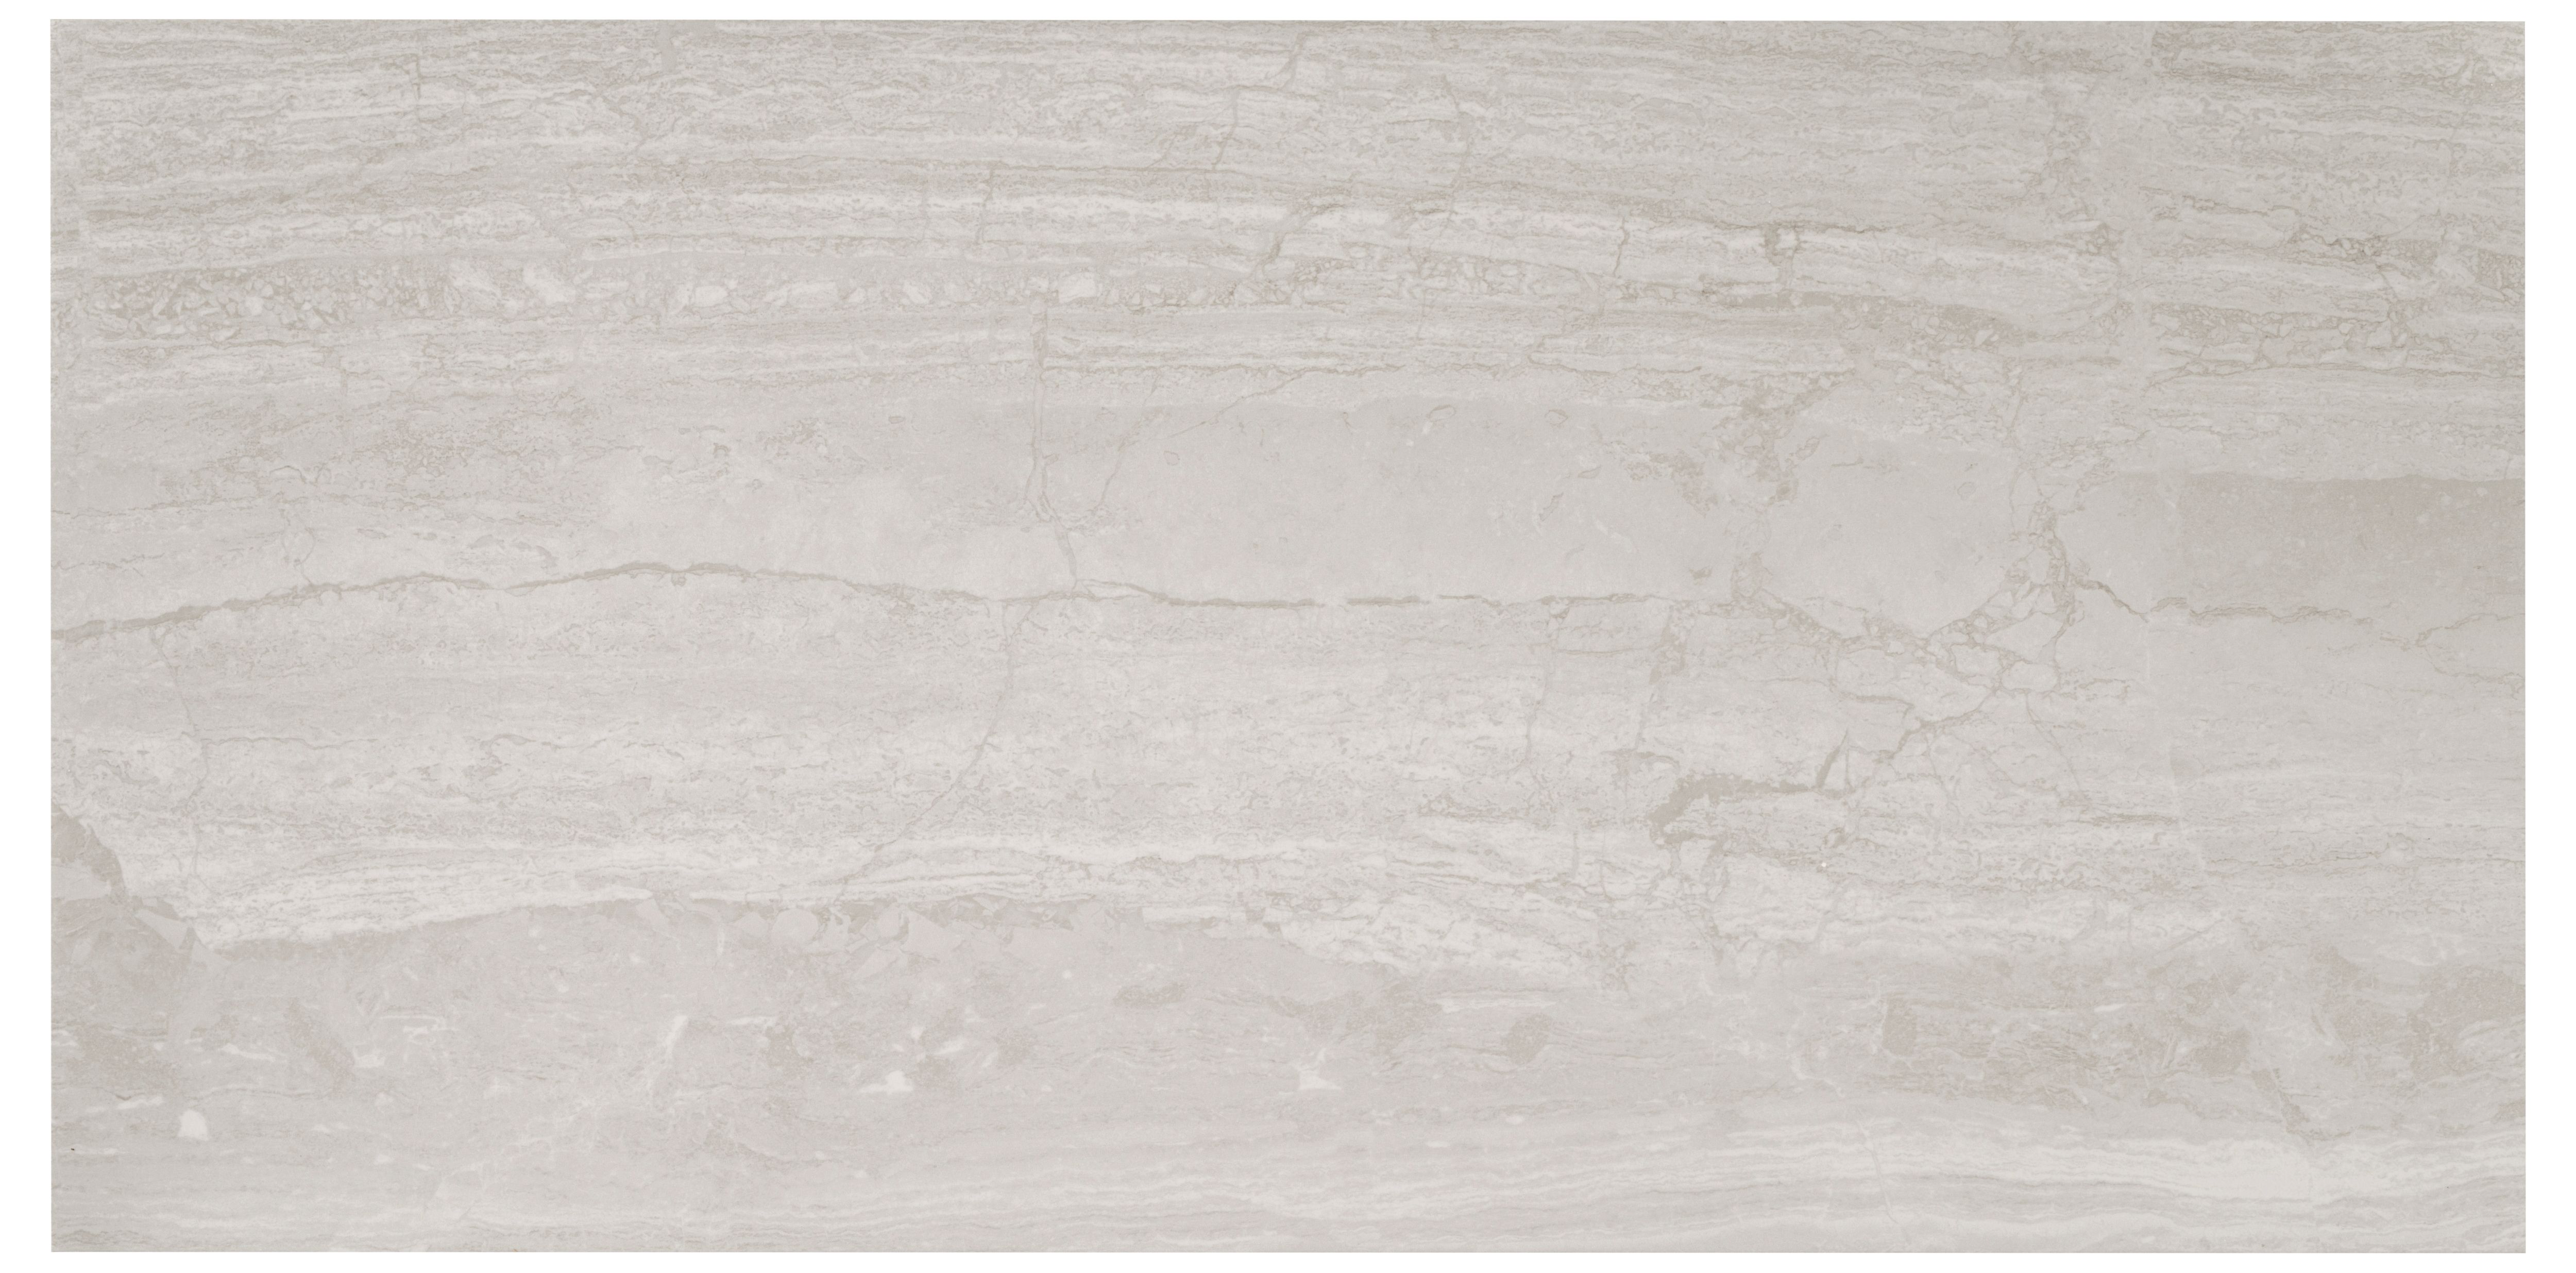 Wickes Olympia Grey Polished Stone Porcelain Wall & Floor Tile - 600 x 300mm - Sample